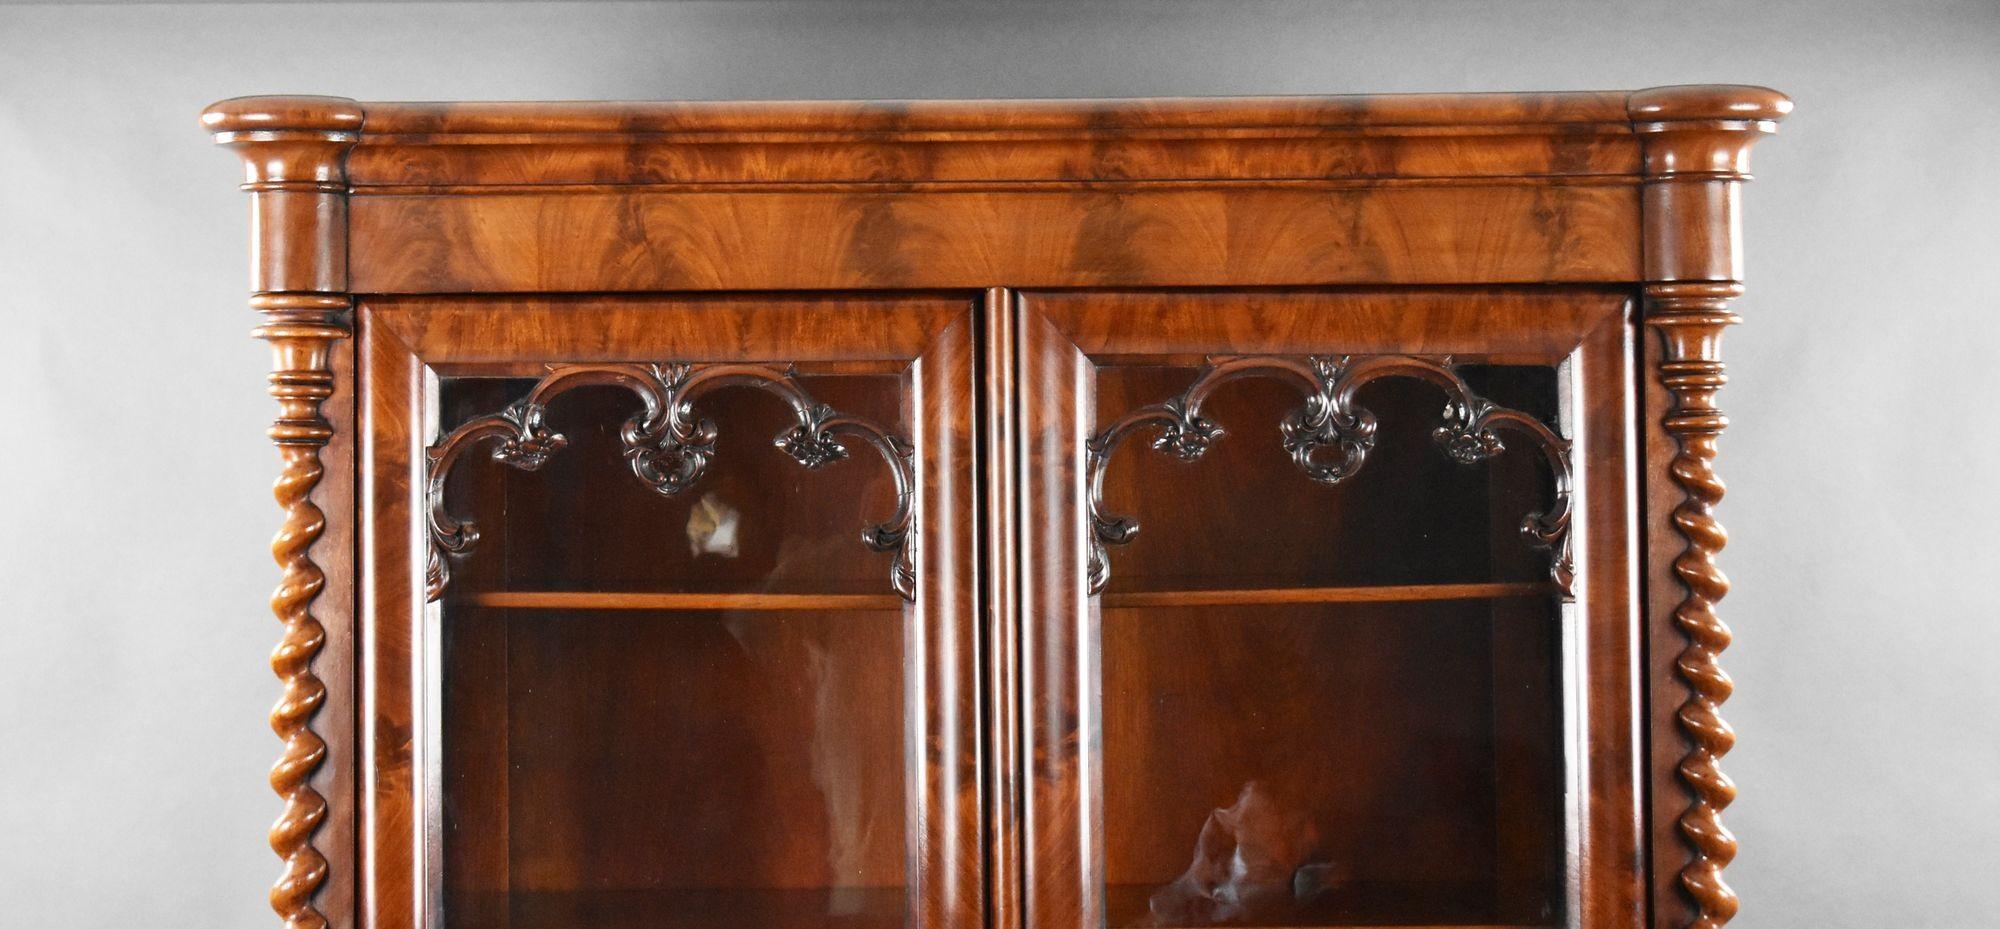 For sale is a good quality 19th century Biedermeier flame mahogany bookcase. Having fine veneers throughout, the bookcase has two glazed doors flanked by turned columns. Opening to four adjustable shelves with a drawer below, the bookcase is in